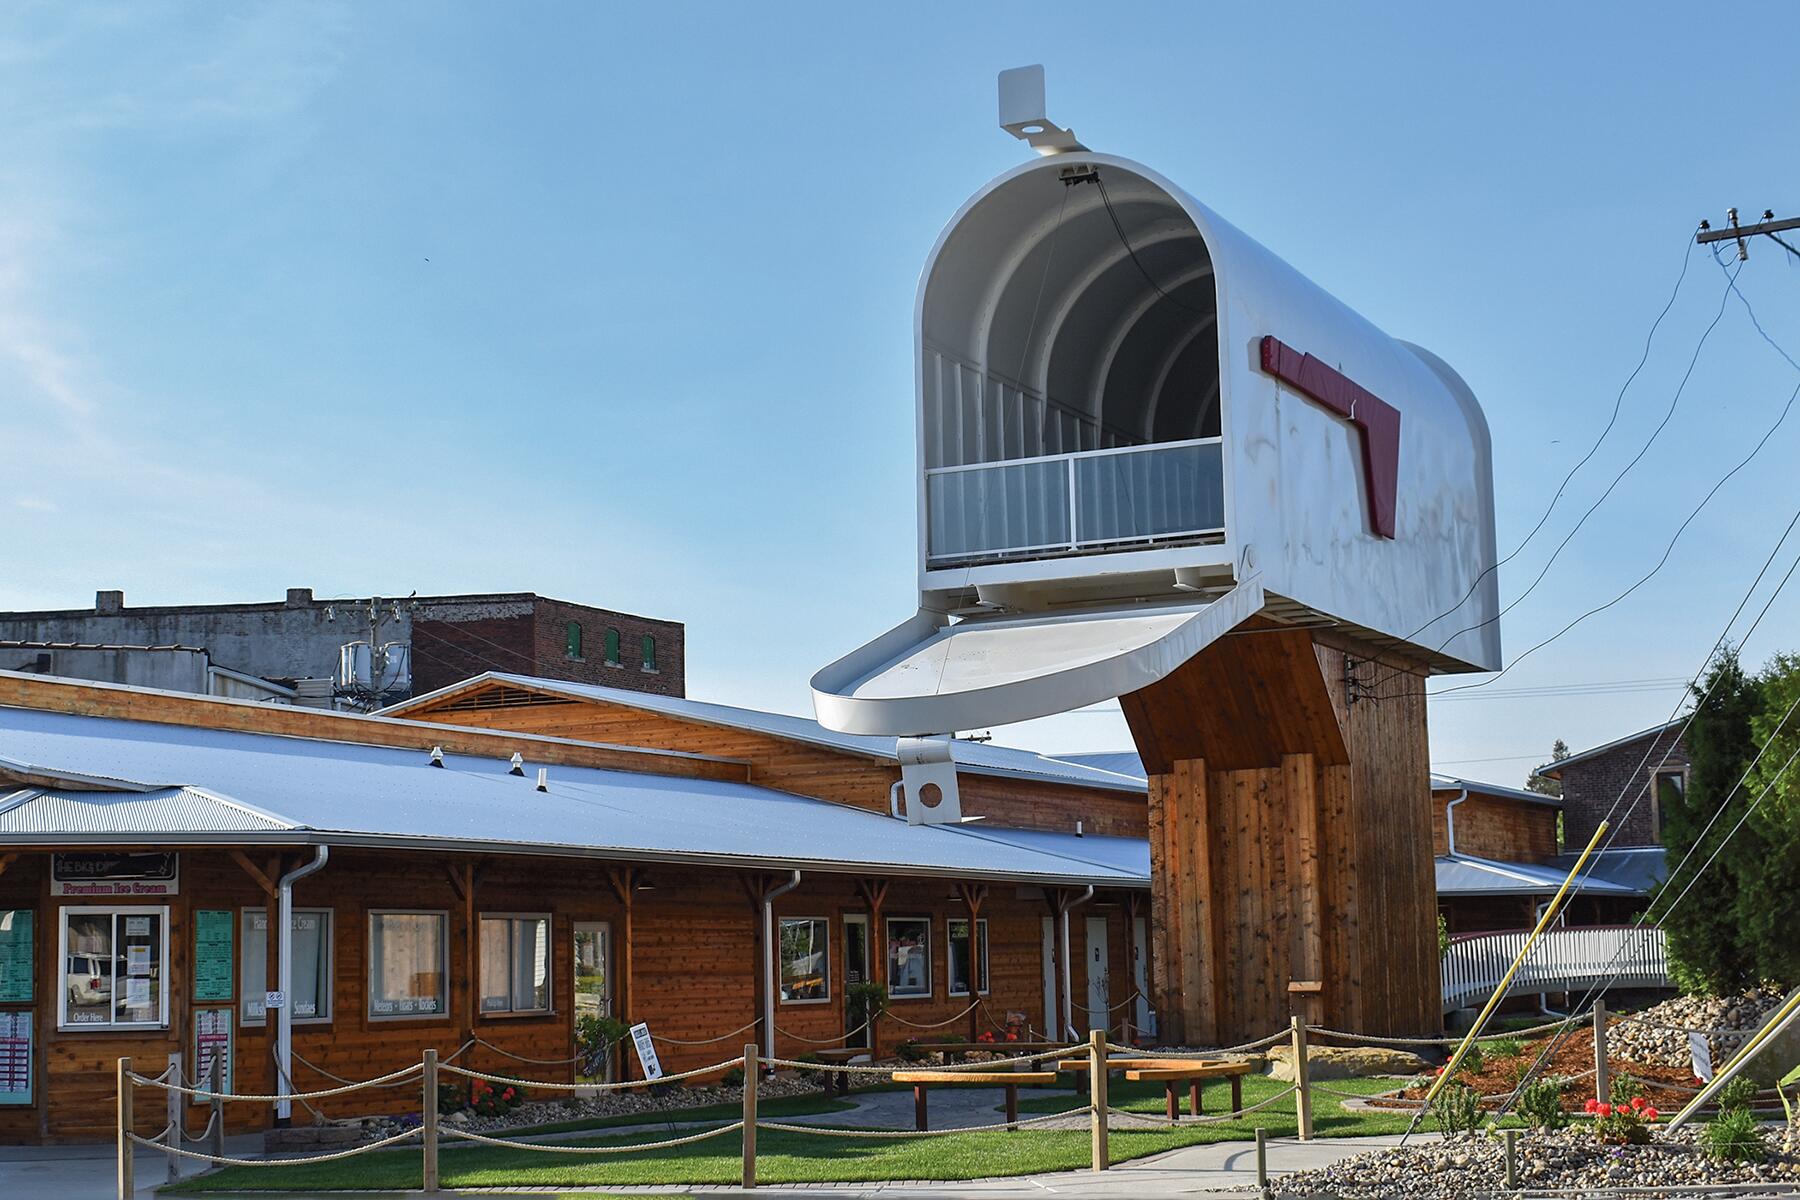   
																This Small U.S. Town Holds 12 of the World’s Largest Objects 
															 